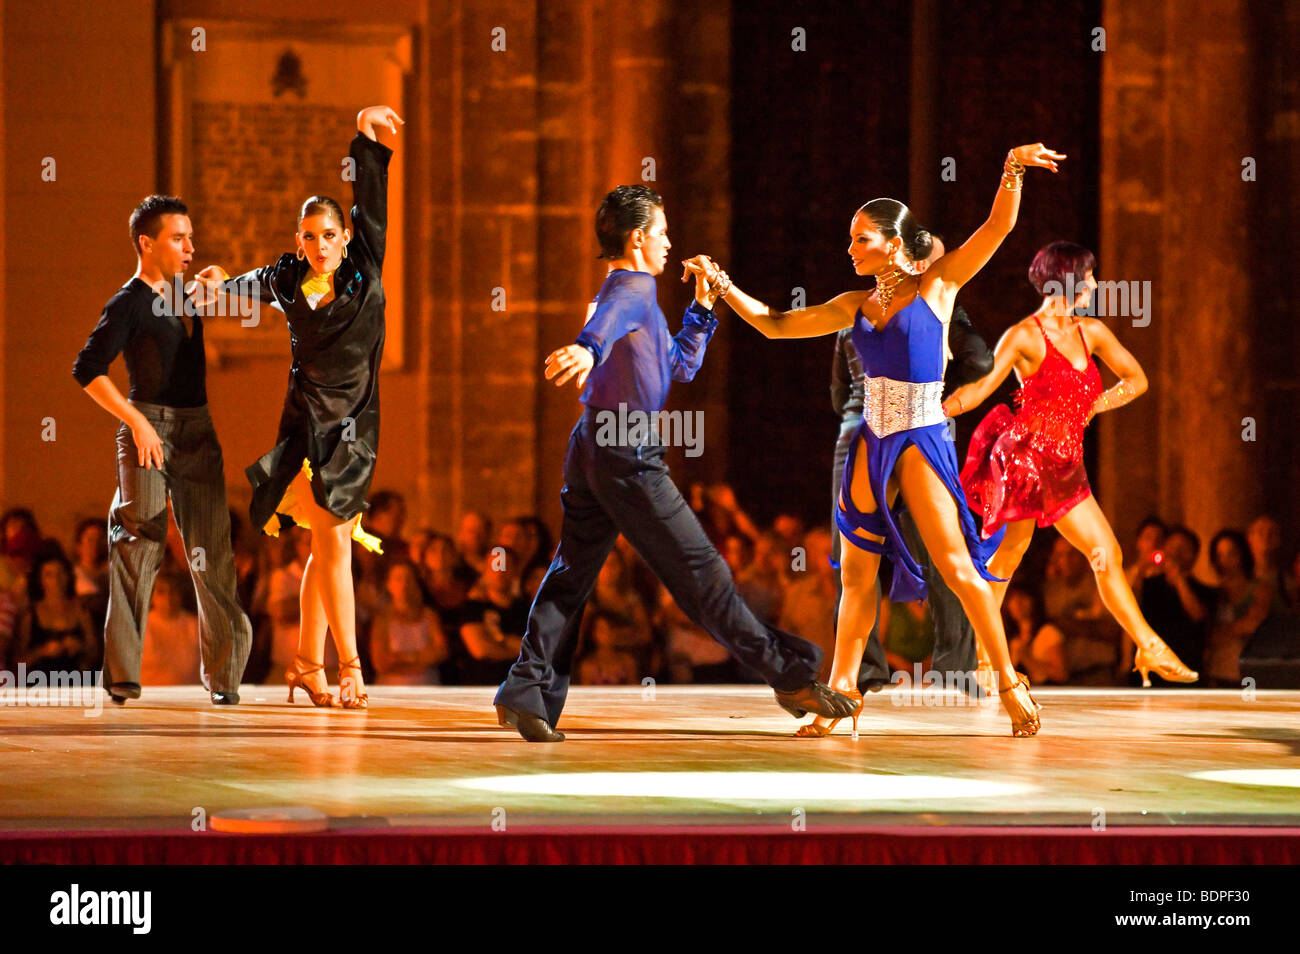 A Spanish dance competition Stock Photo